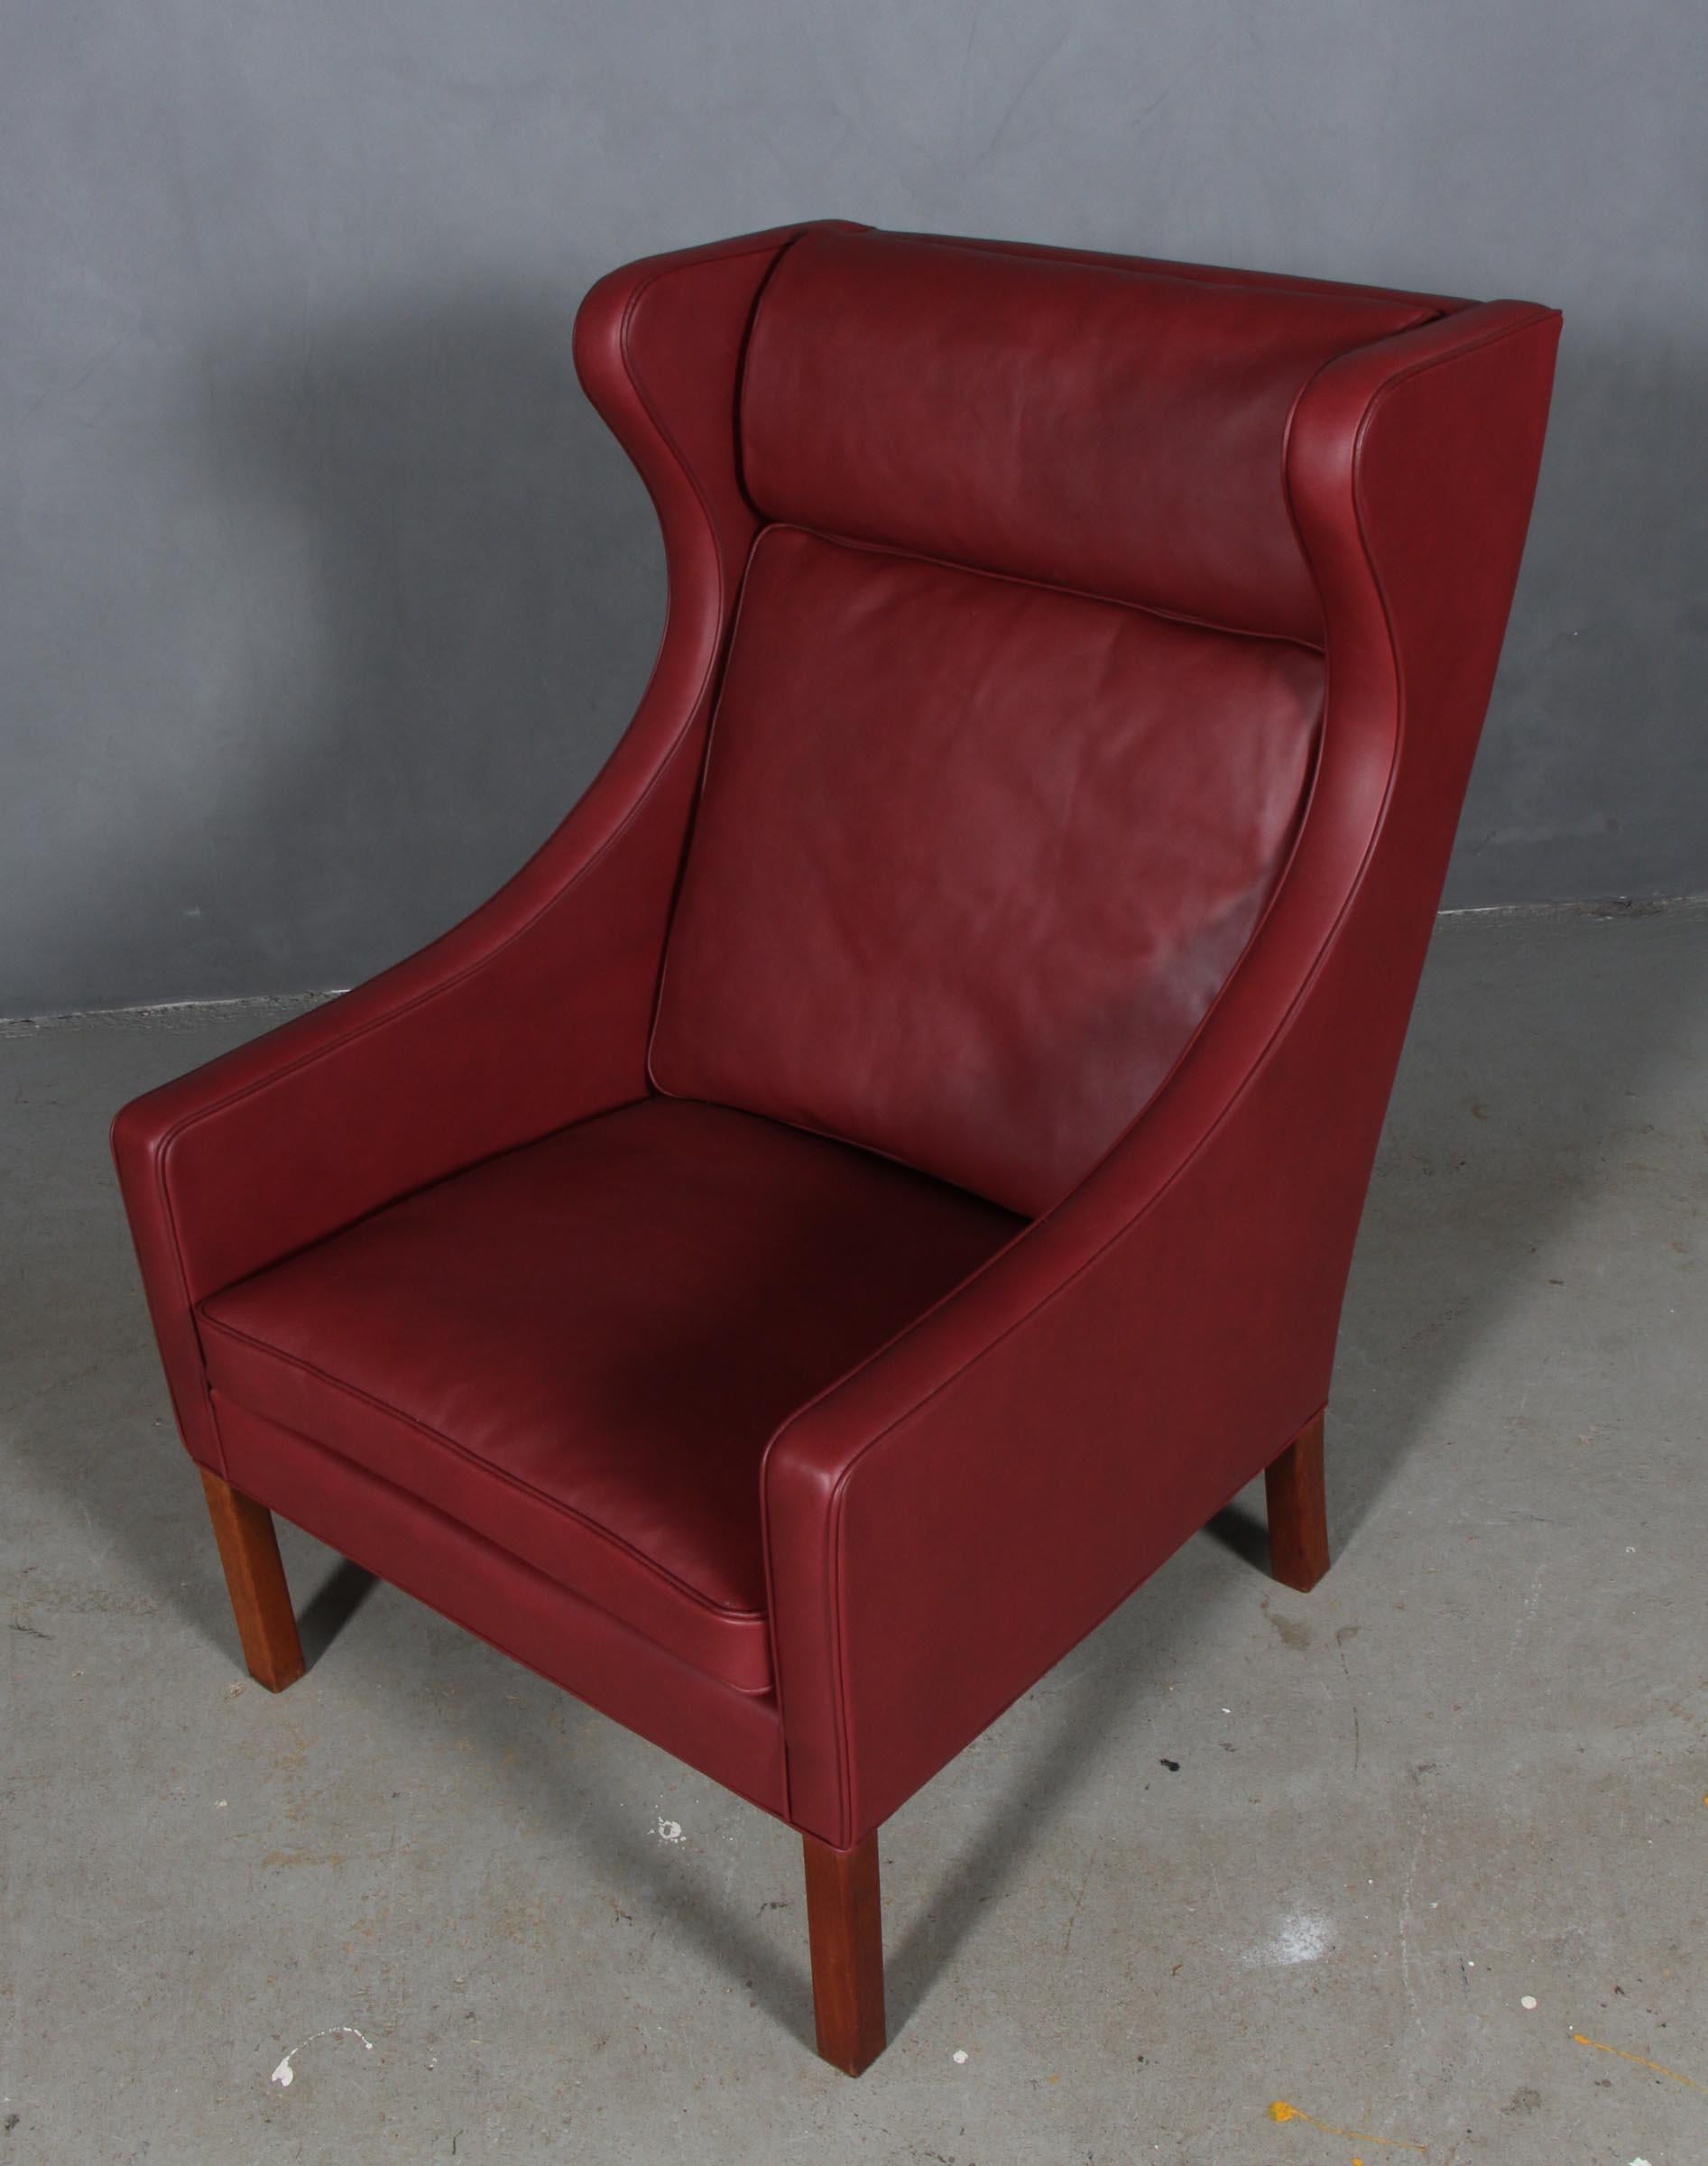 Børge Mogensen wingback chair new upholstered with indian red elegance leather.

Legs in teak.

Model 2204, made by Fredericia Furniture.